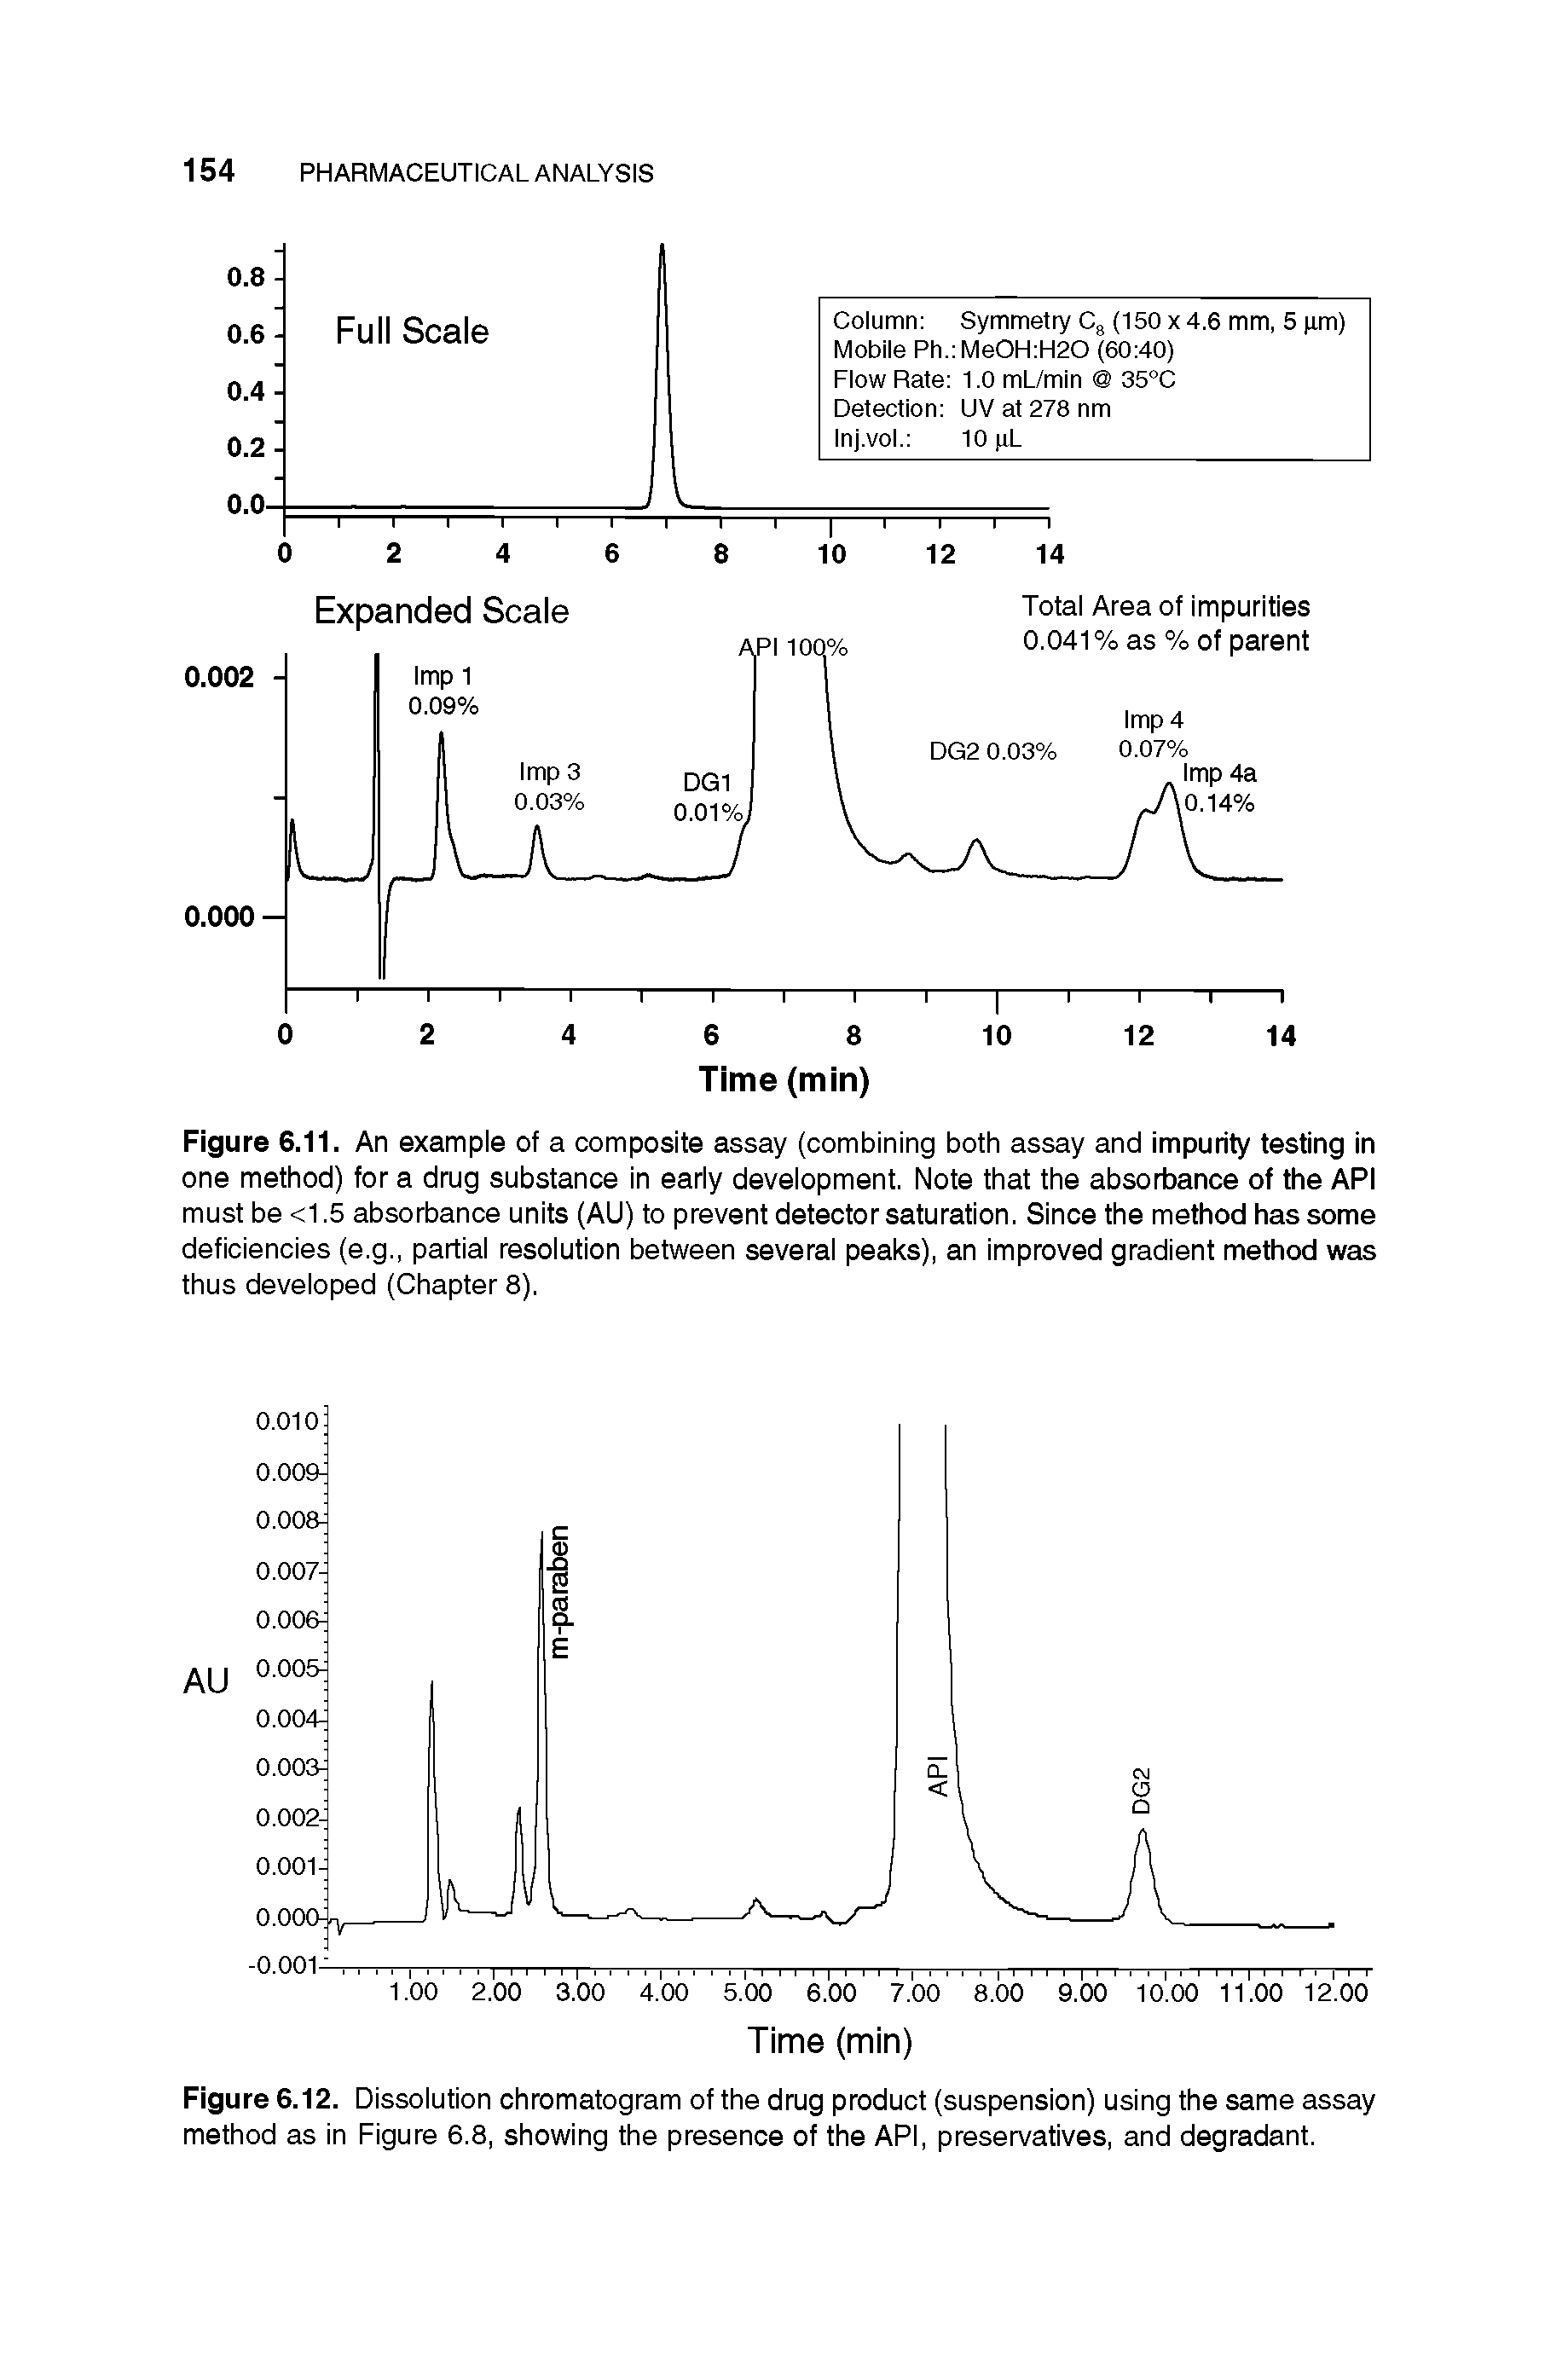 Figure 6.11. An example of a composite assay (combining both assay and impurity testing in one method) for a drug substance in early development. Note that the absorbance of the API must be <1.5 absorbance units (AU) to prevent detector saturation. Since the method has some deficiencies (e.g., partial resolution between several peaks), an improved gradient method was thus developed (Chapter 8).